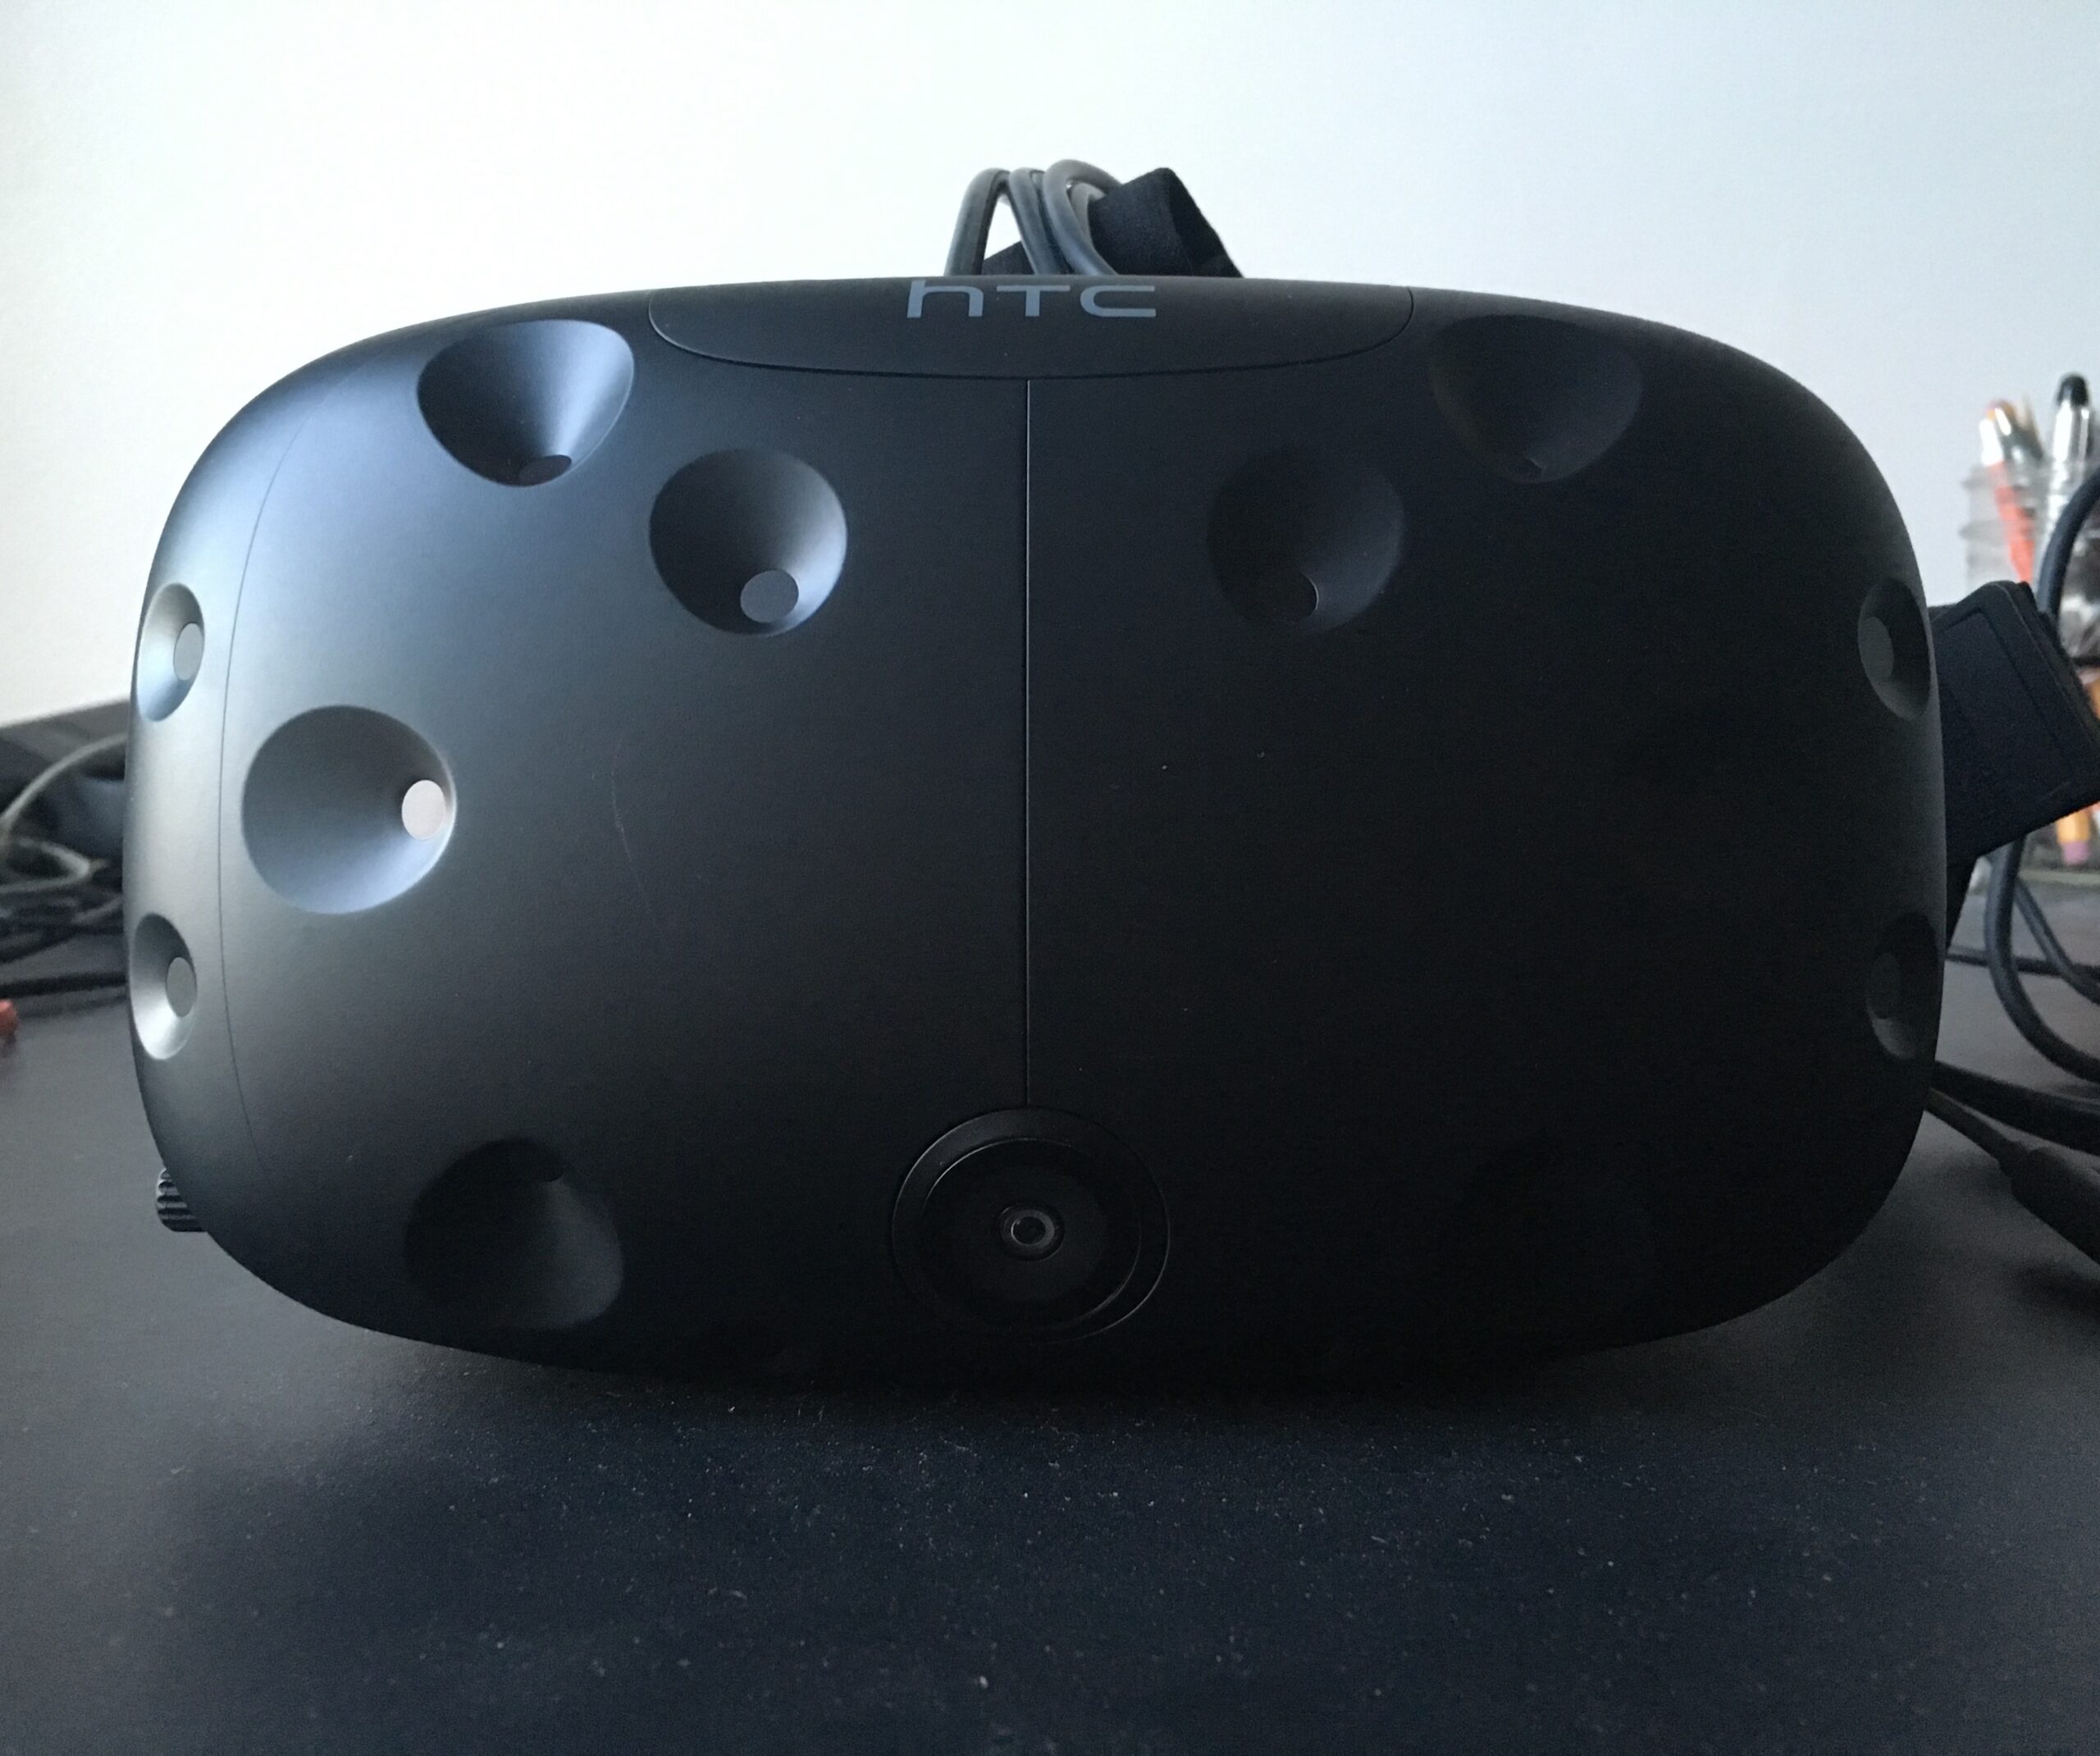 This HTC Vive Hack Gives An Early Look At Playstation VR